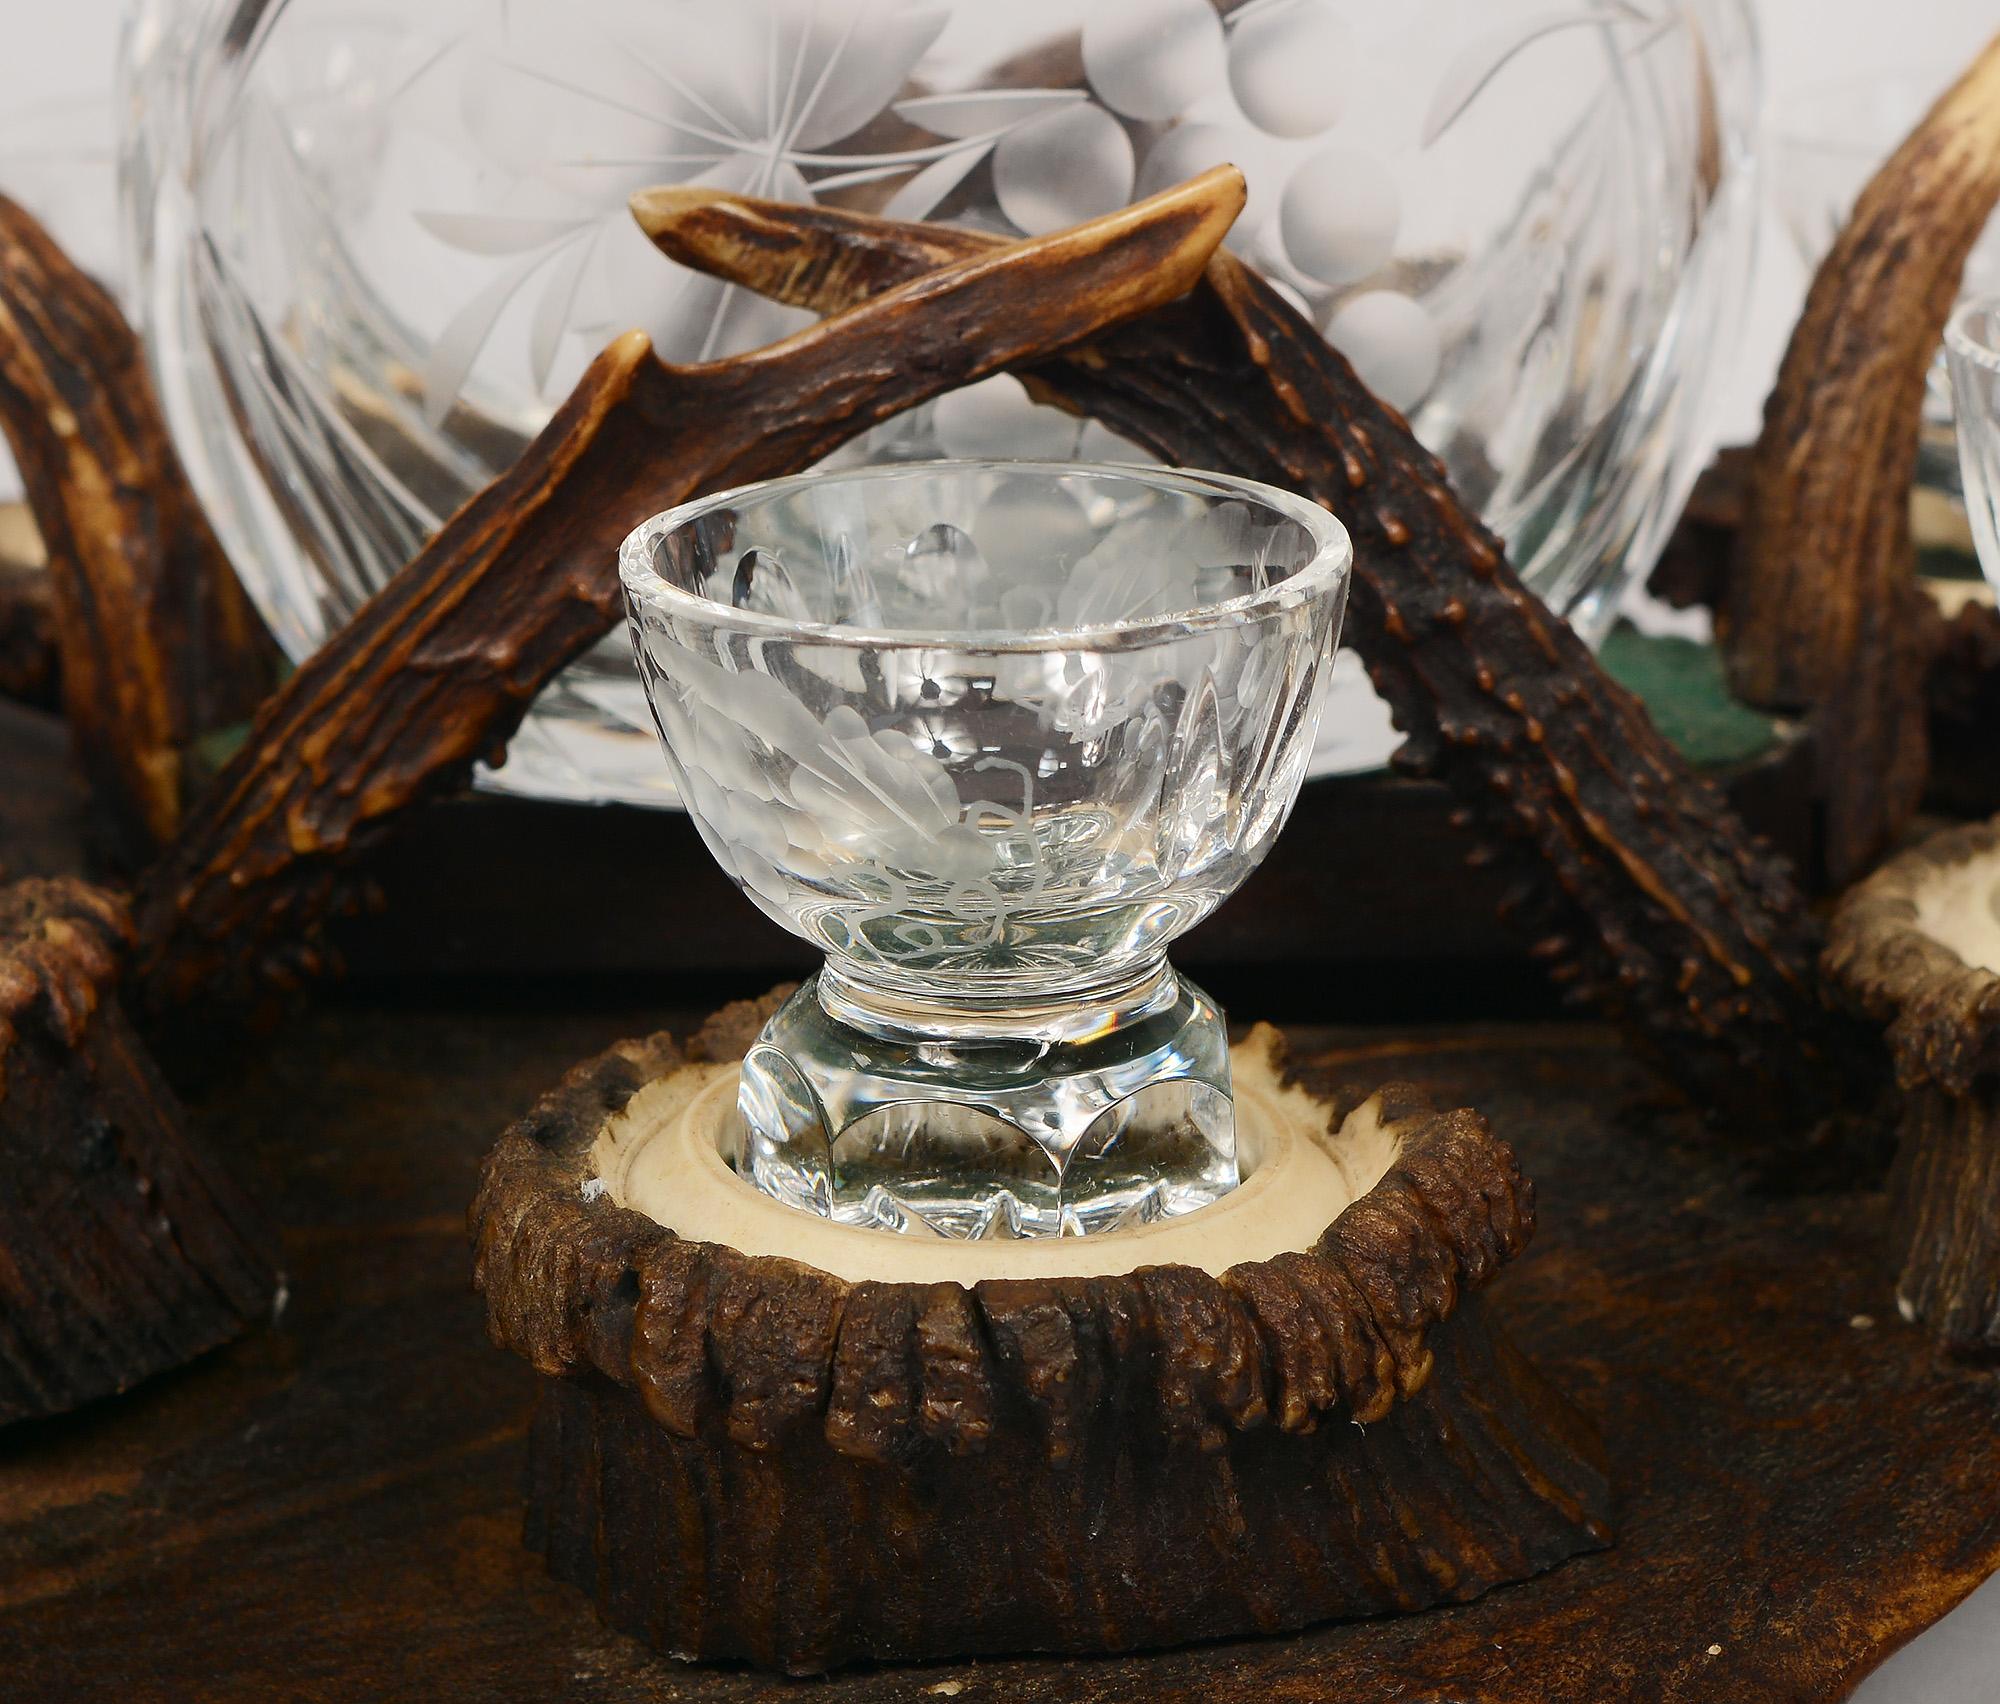 German Black Forest Antler Tray with Decanter and Glasses For Sale 8